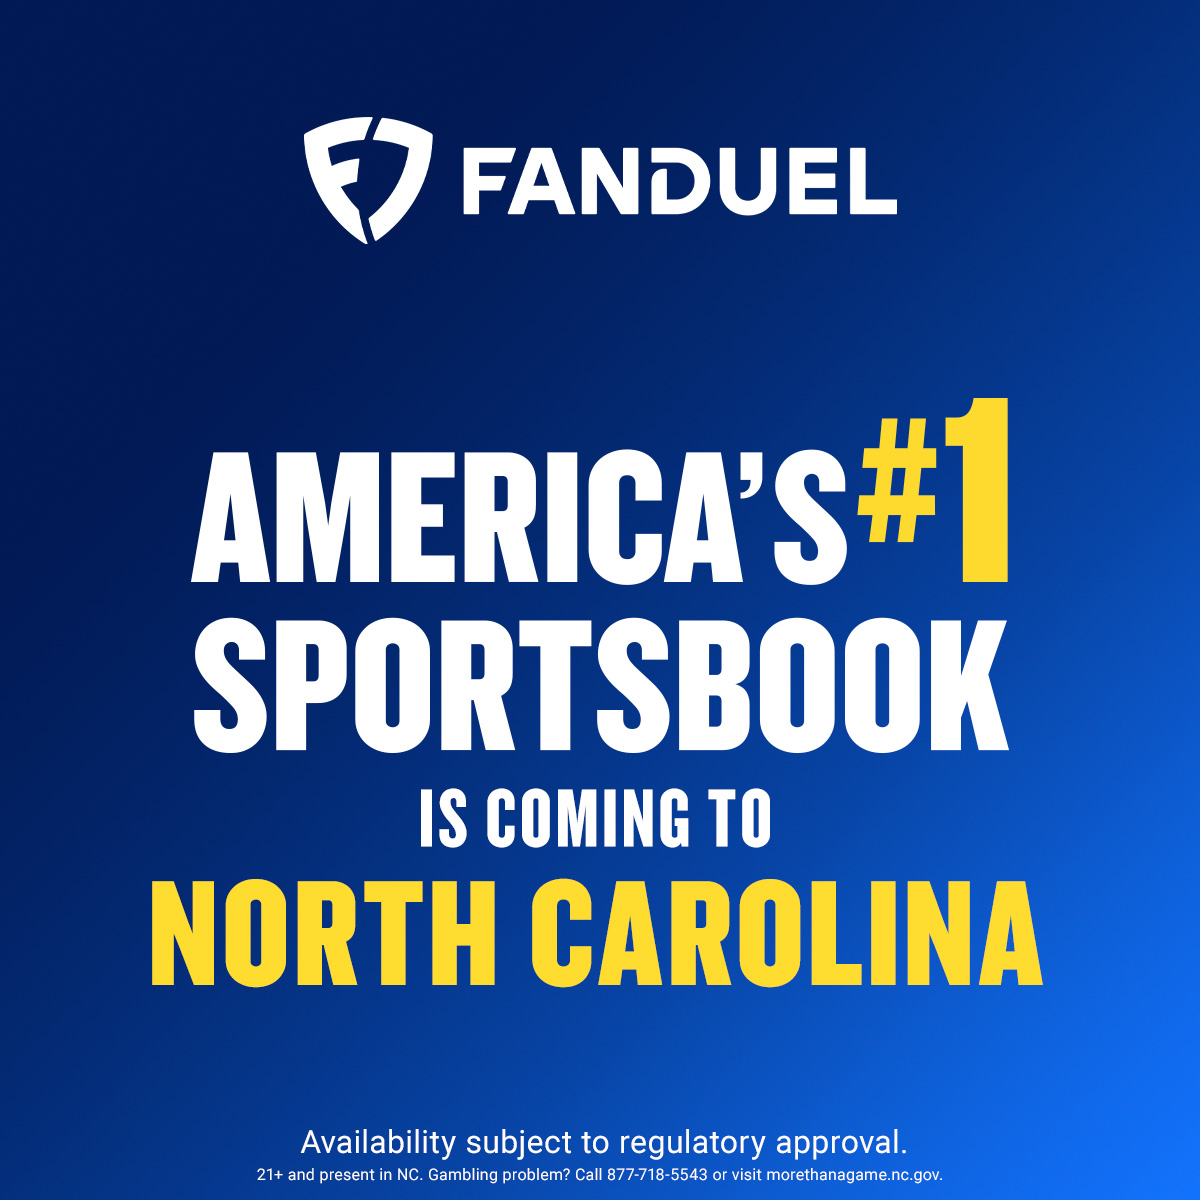 Let's go, North Carolina! 🙌 We're coming to the Tar Heel State on March 11th, pending regulatory approval. Click here to stay up to date: fanduel.com/northcarolina